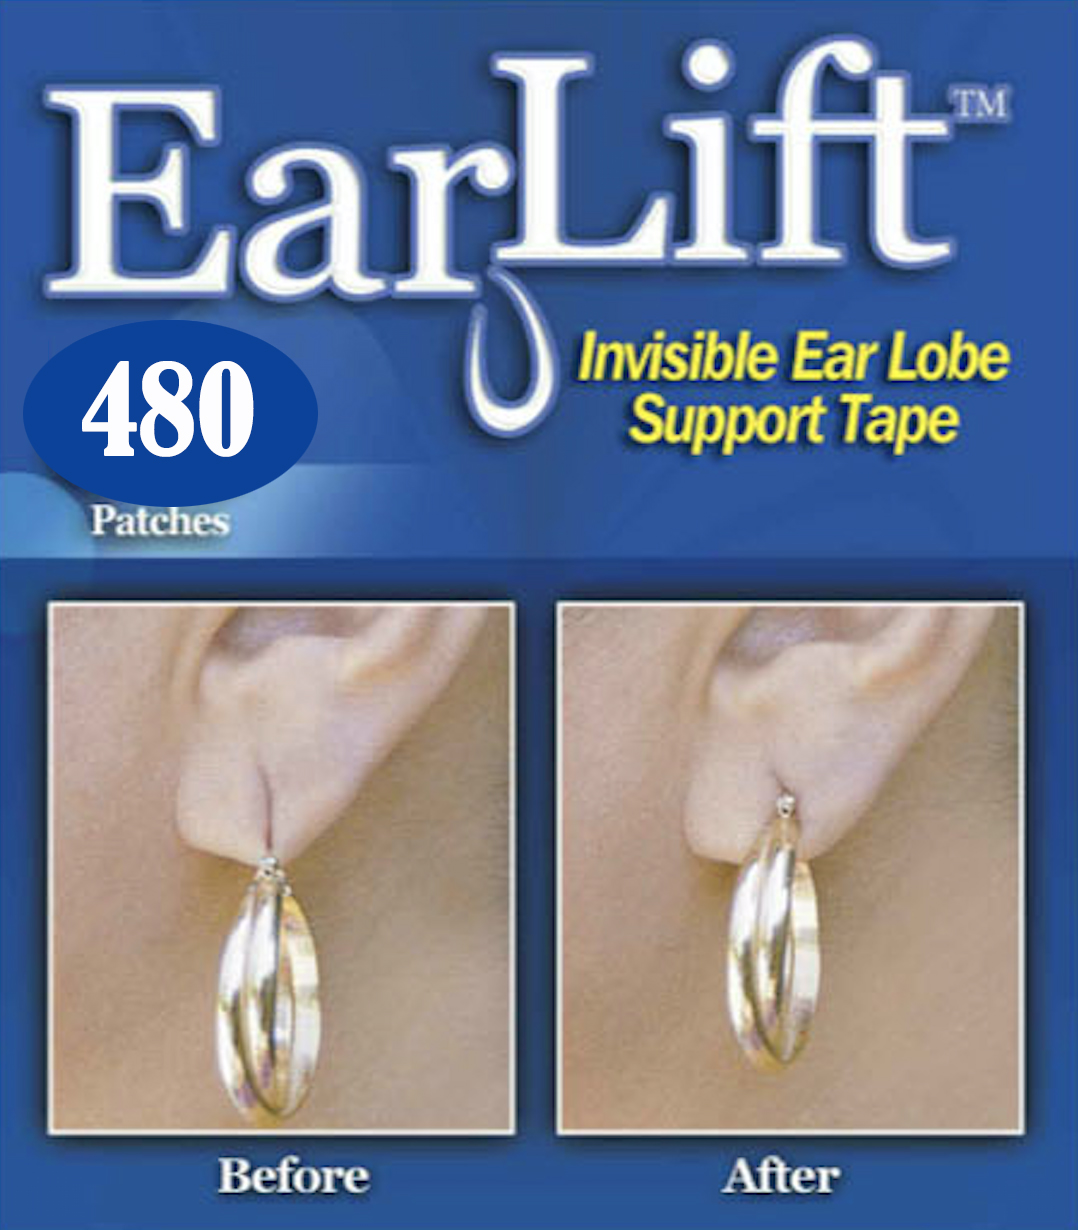 Earlift Earring Support Patches - 8 Pack (480 patches)